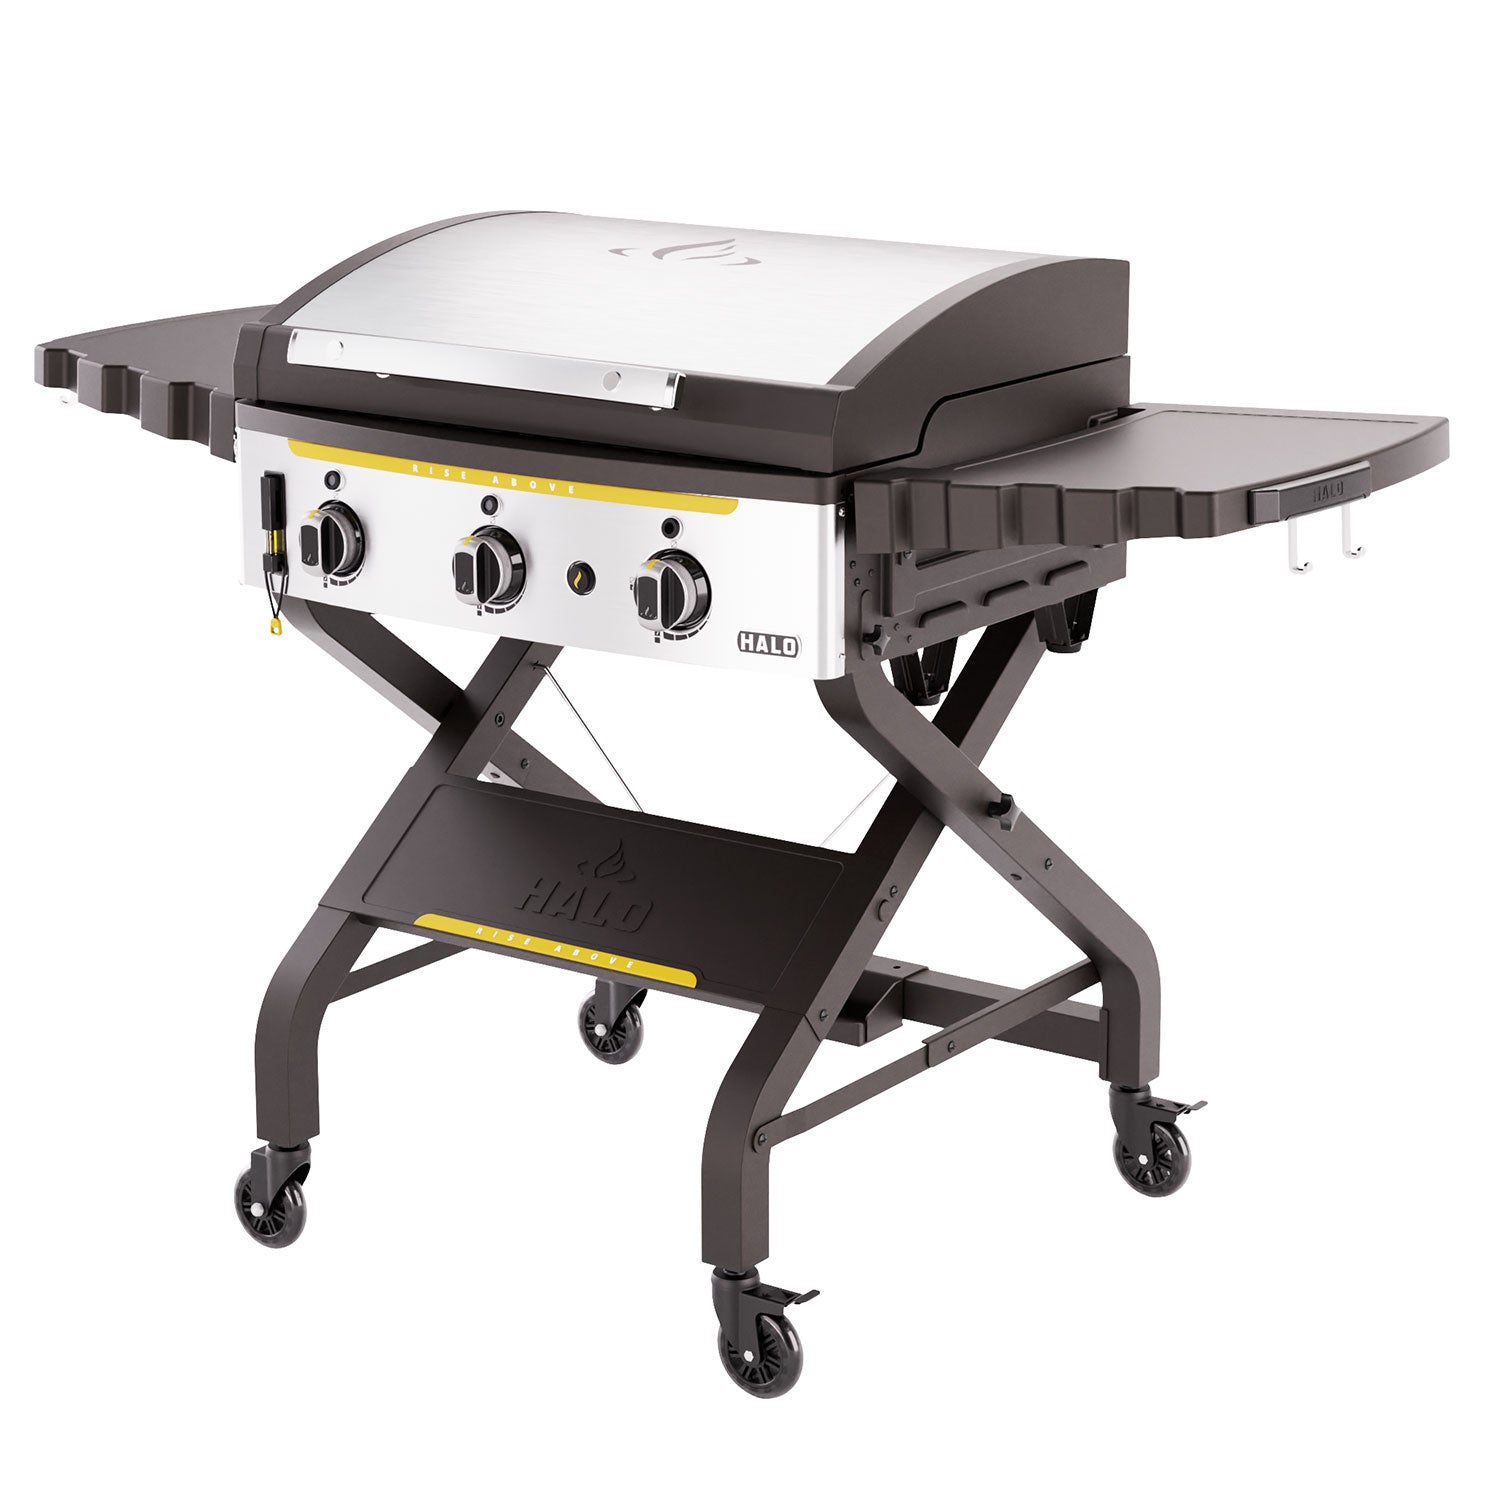 Griddles Barbecue & Outdoor Grilling